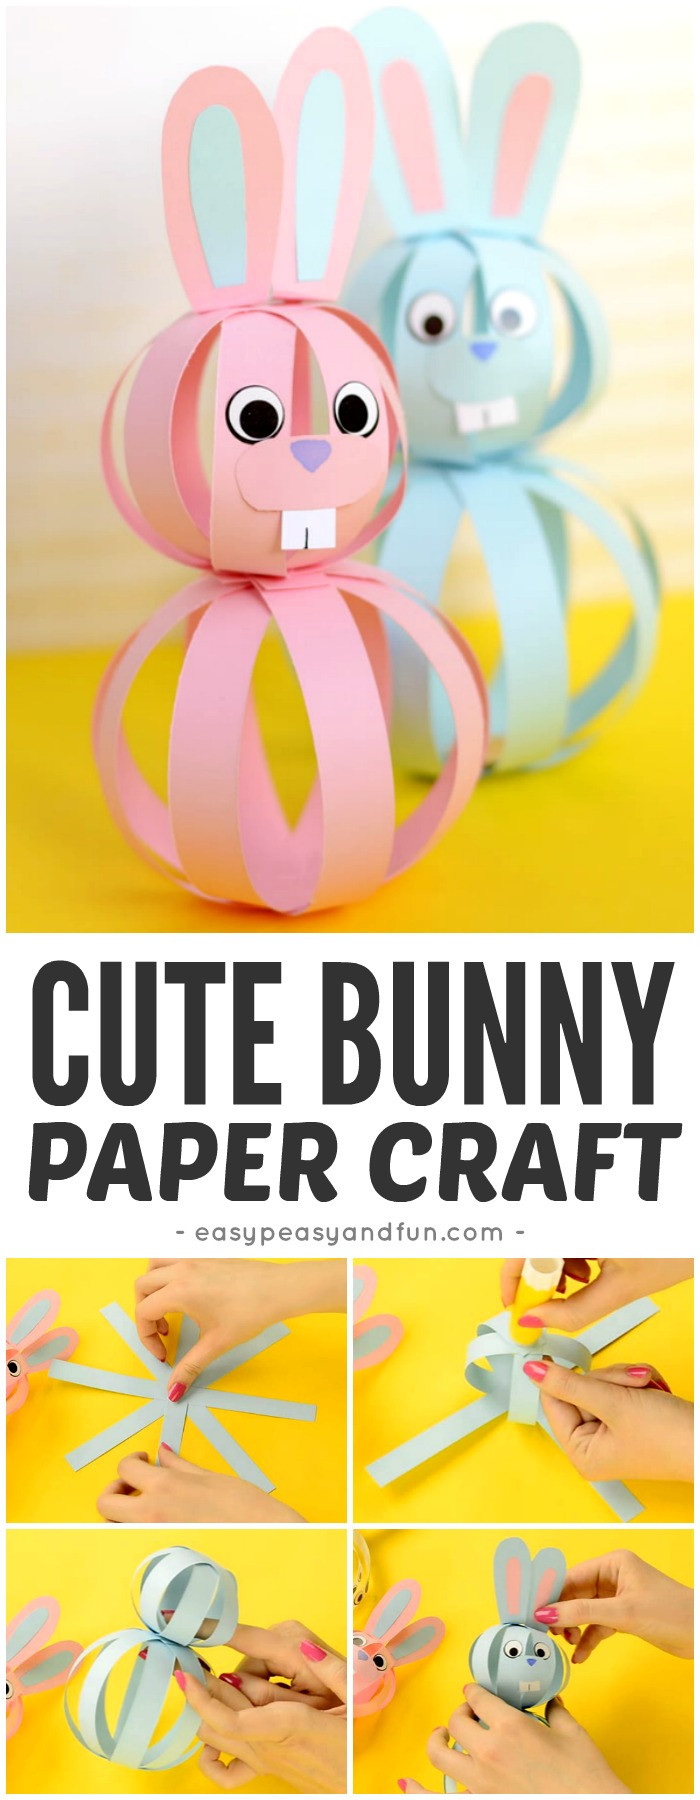 Cute Easy Crafts For Kids
 Easy Paper Bunny Craft Easter Idea for Kids Easy Peasy